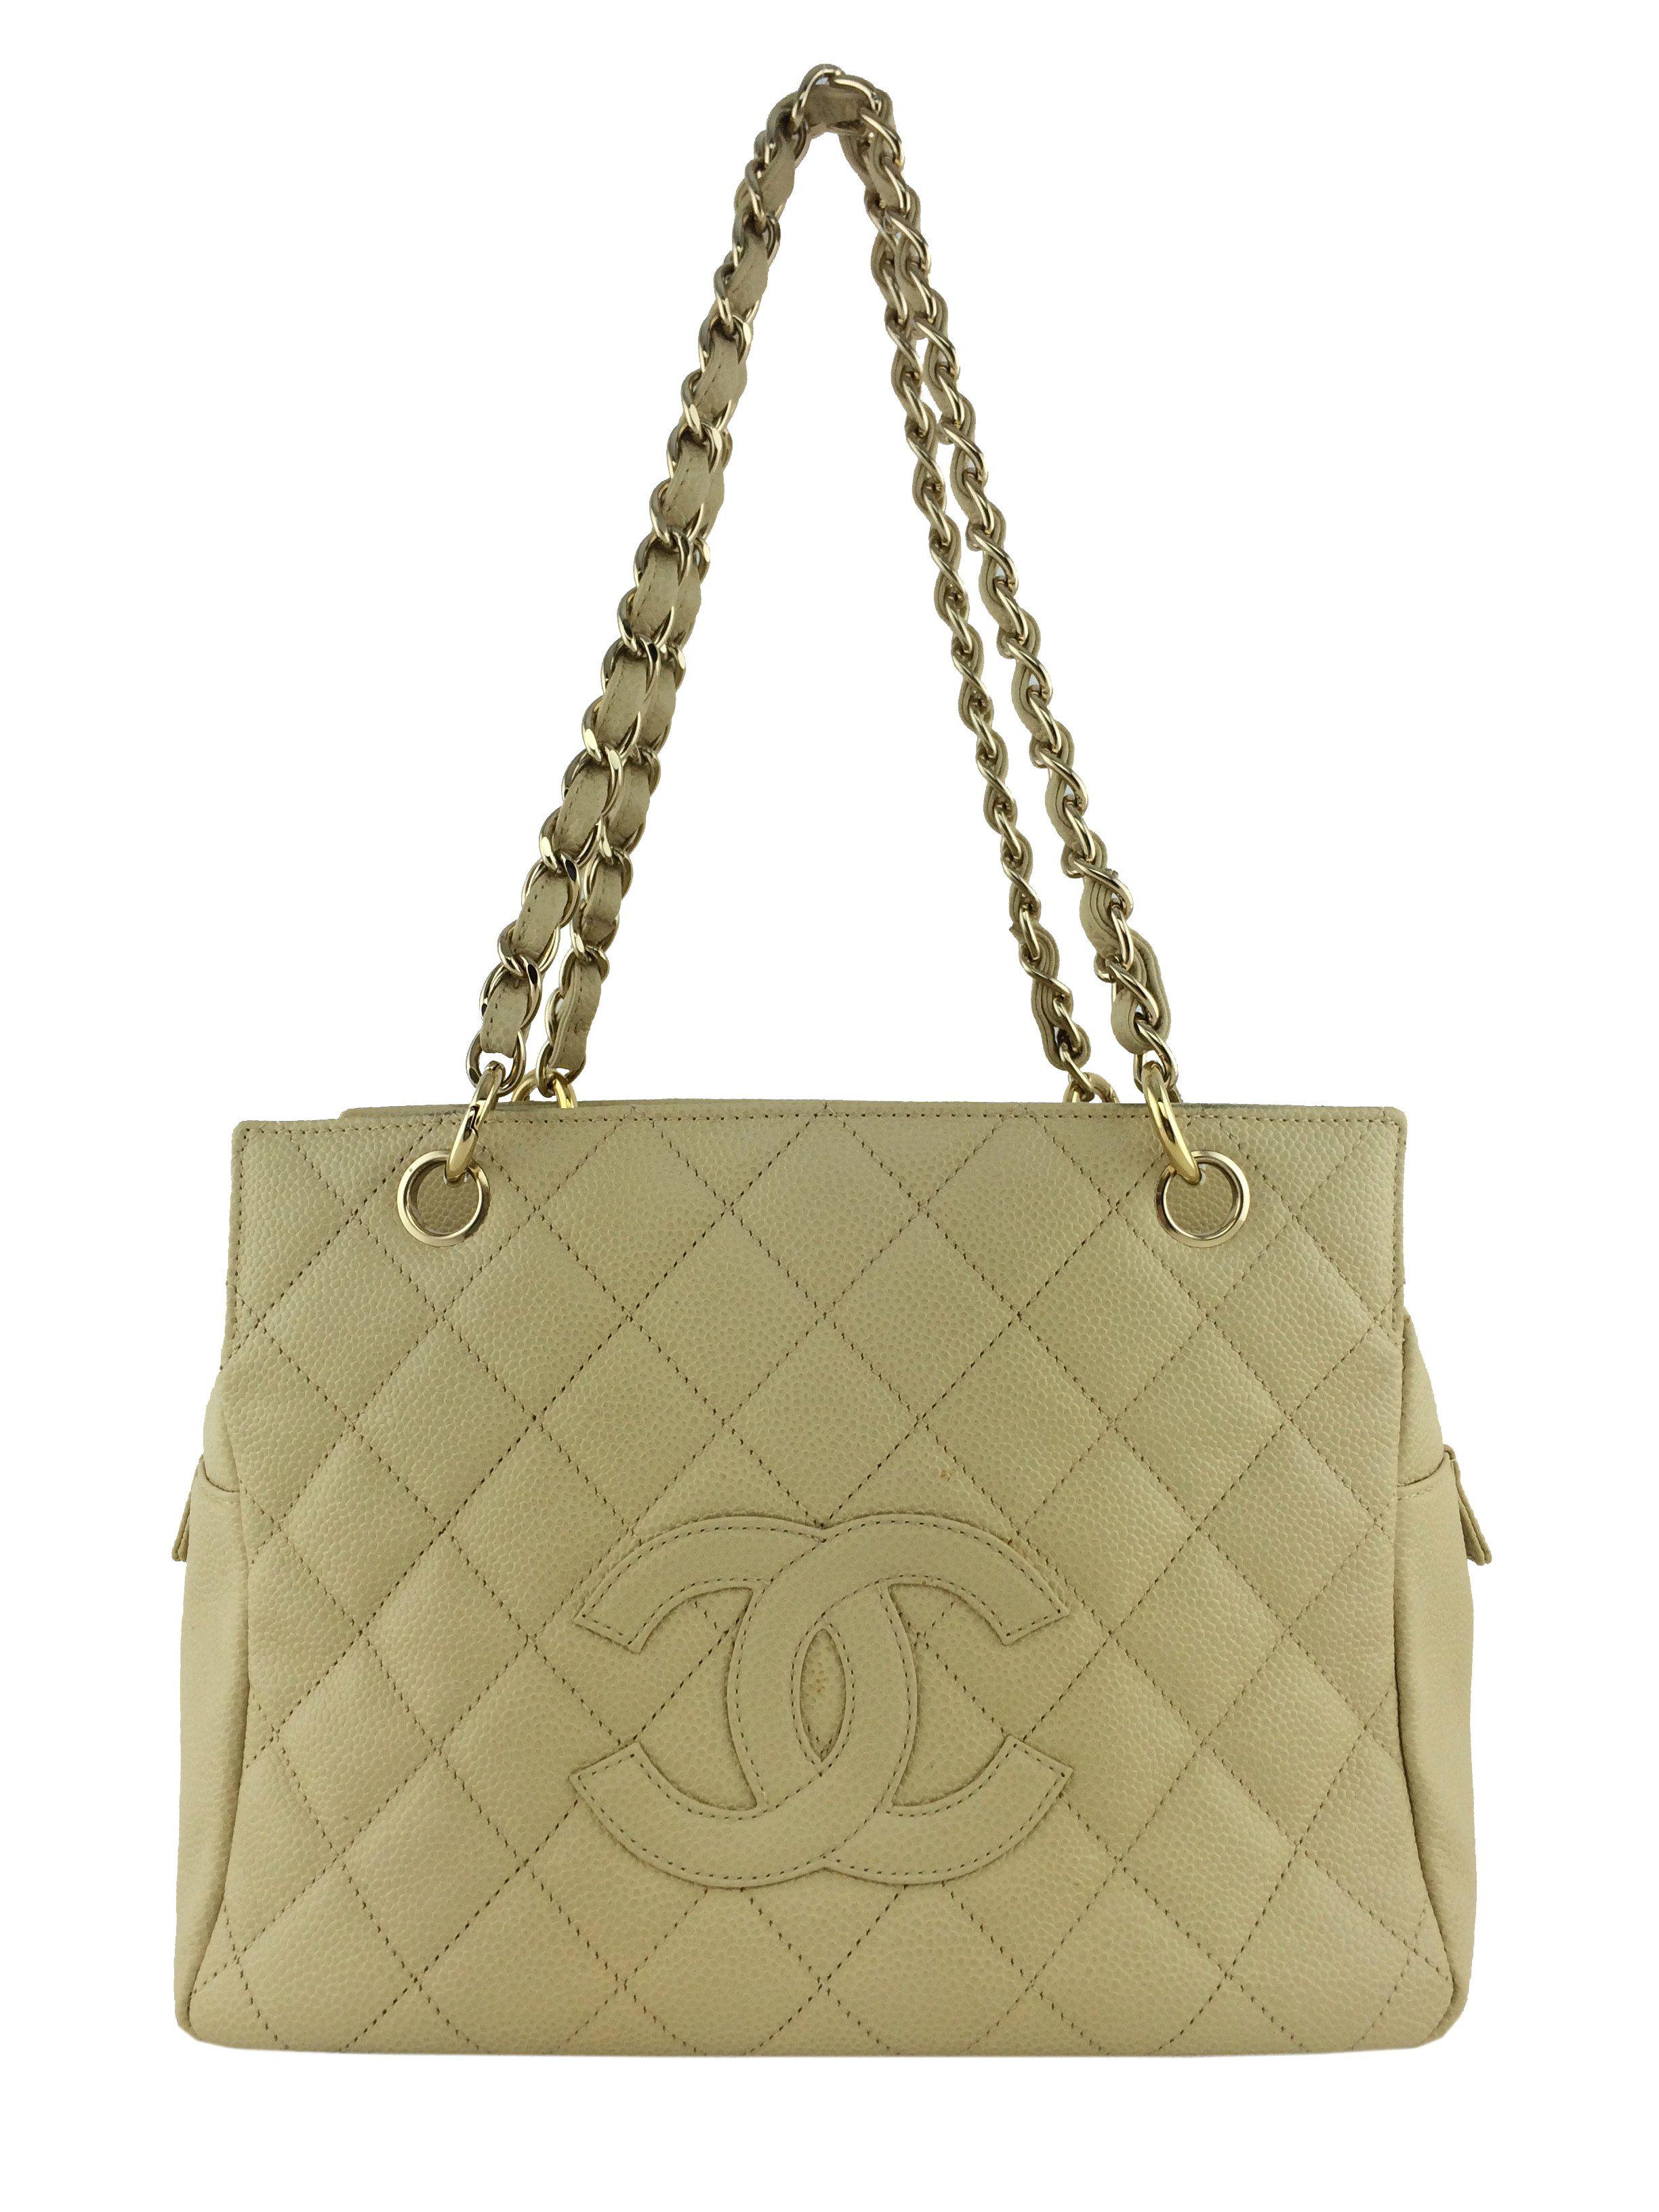 Chanel Caviar Leather Petite Timeless Tote Bag - Consigned Designs